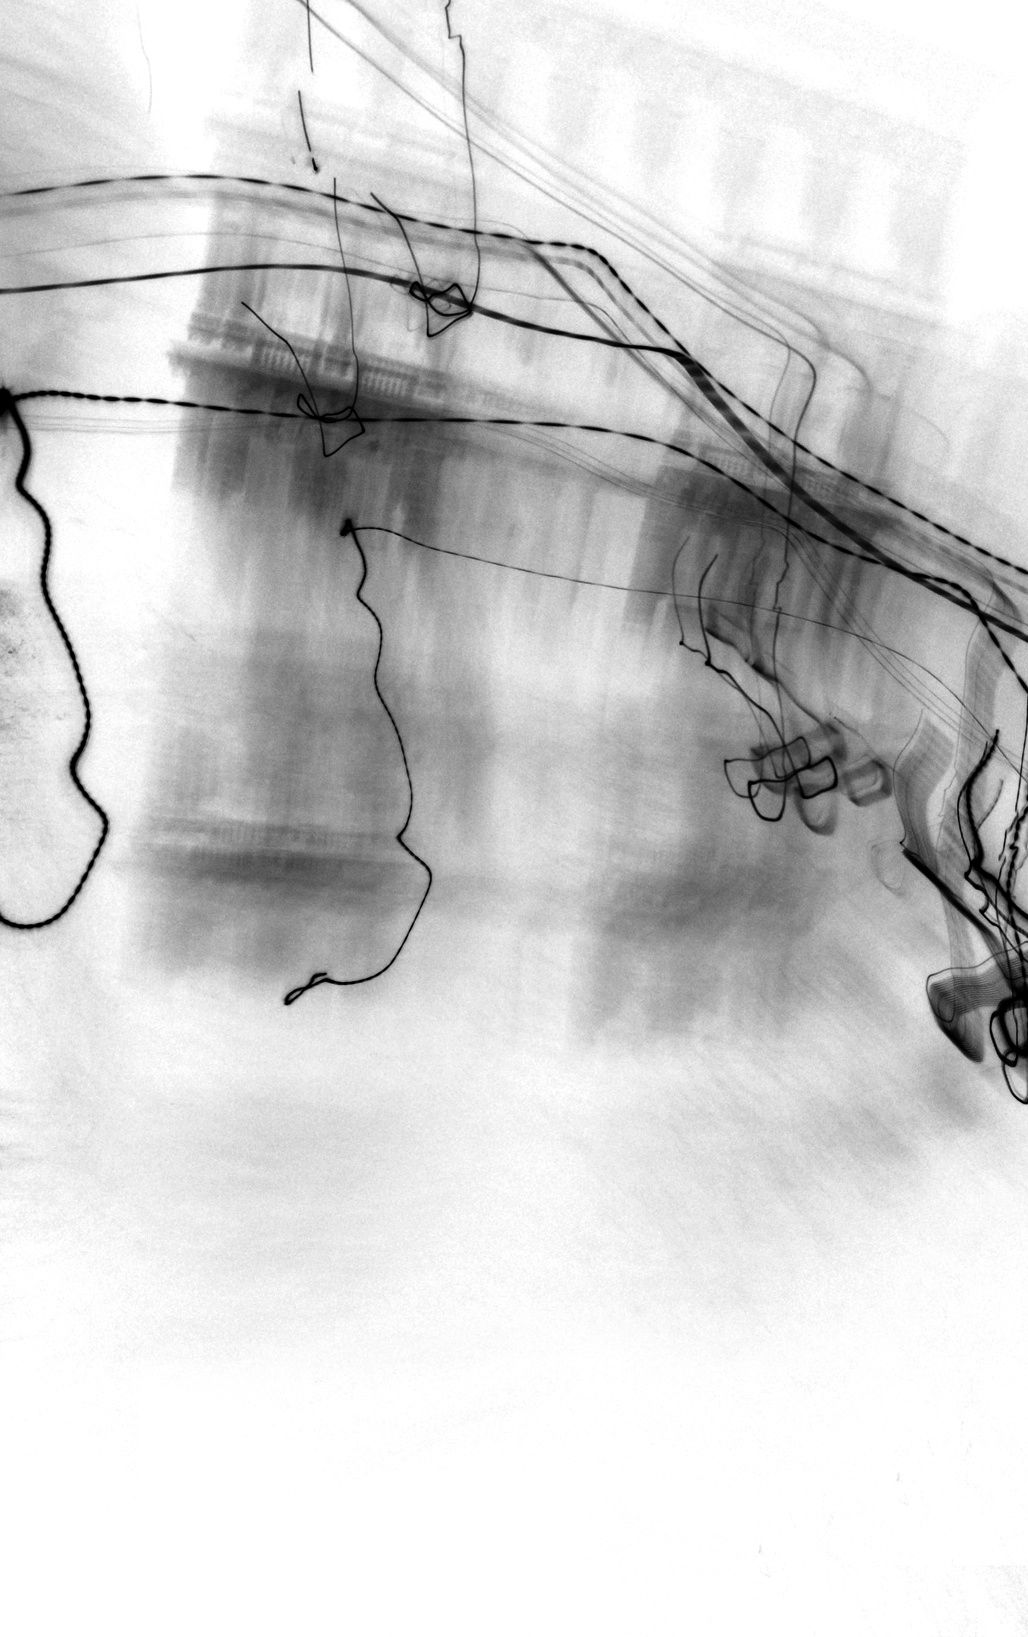 Venice On My Mind, 2012, Black and White Abstract Photography, Shirine Gill